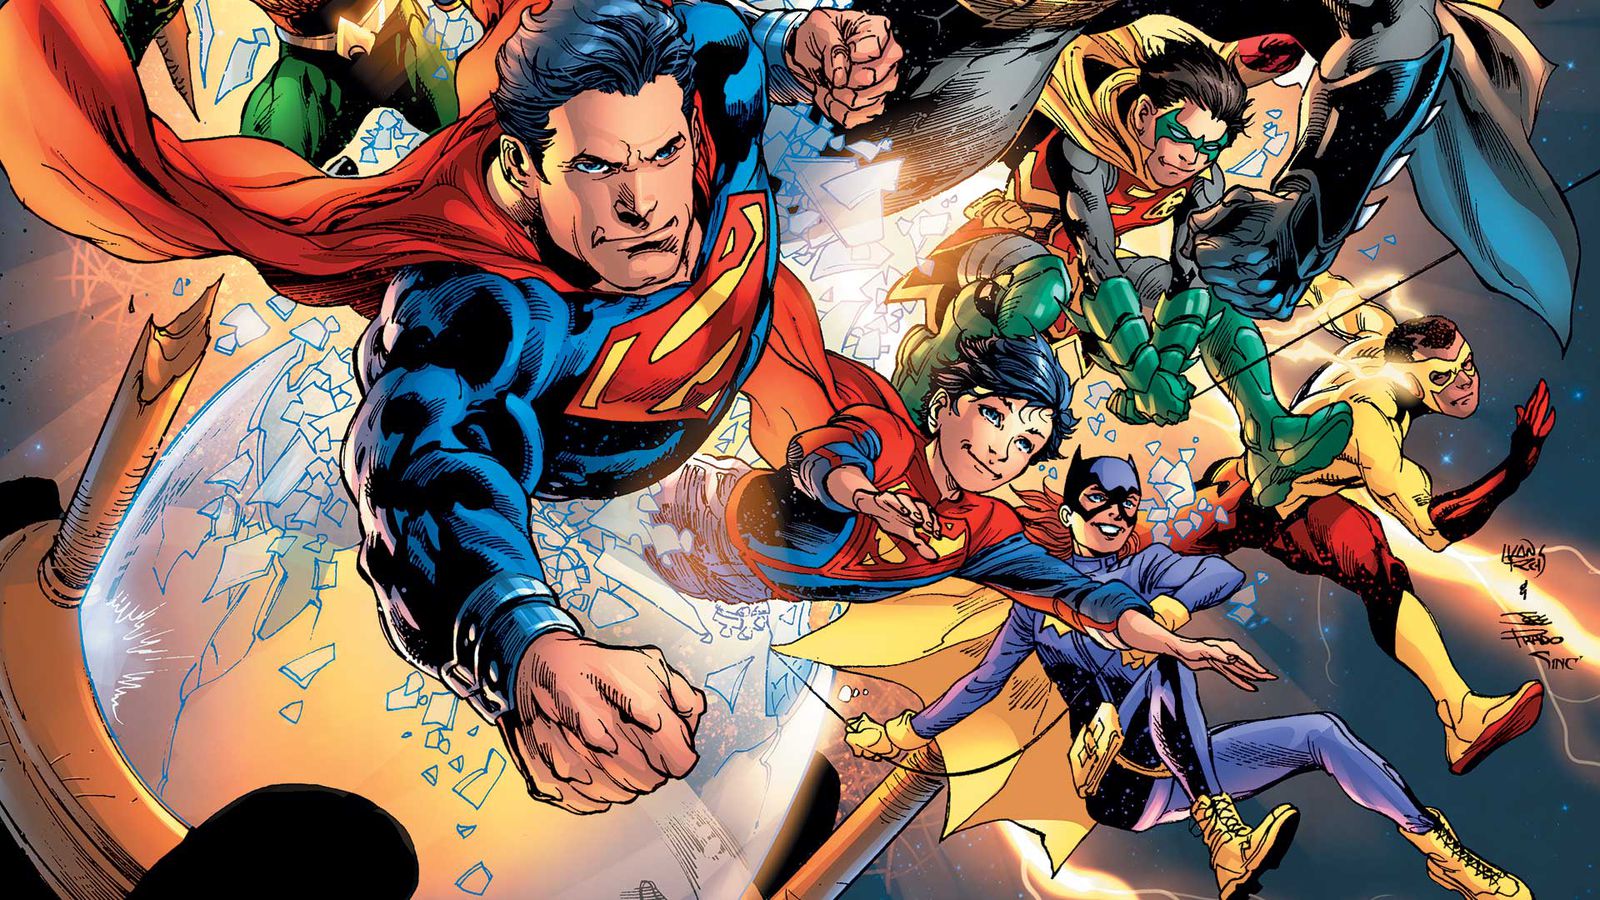 A layman's guide to why people are flipping out over DC Comics' Rebirth